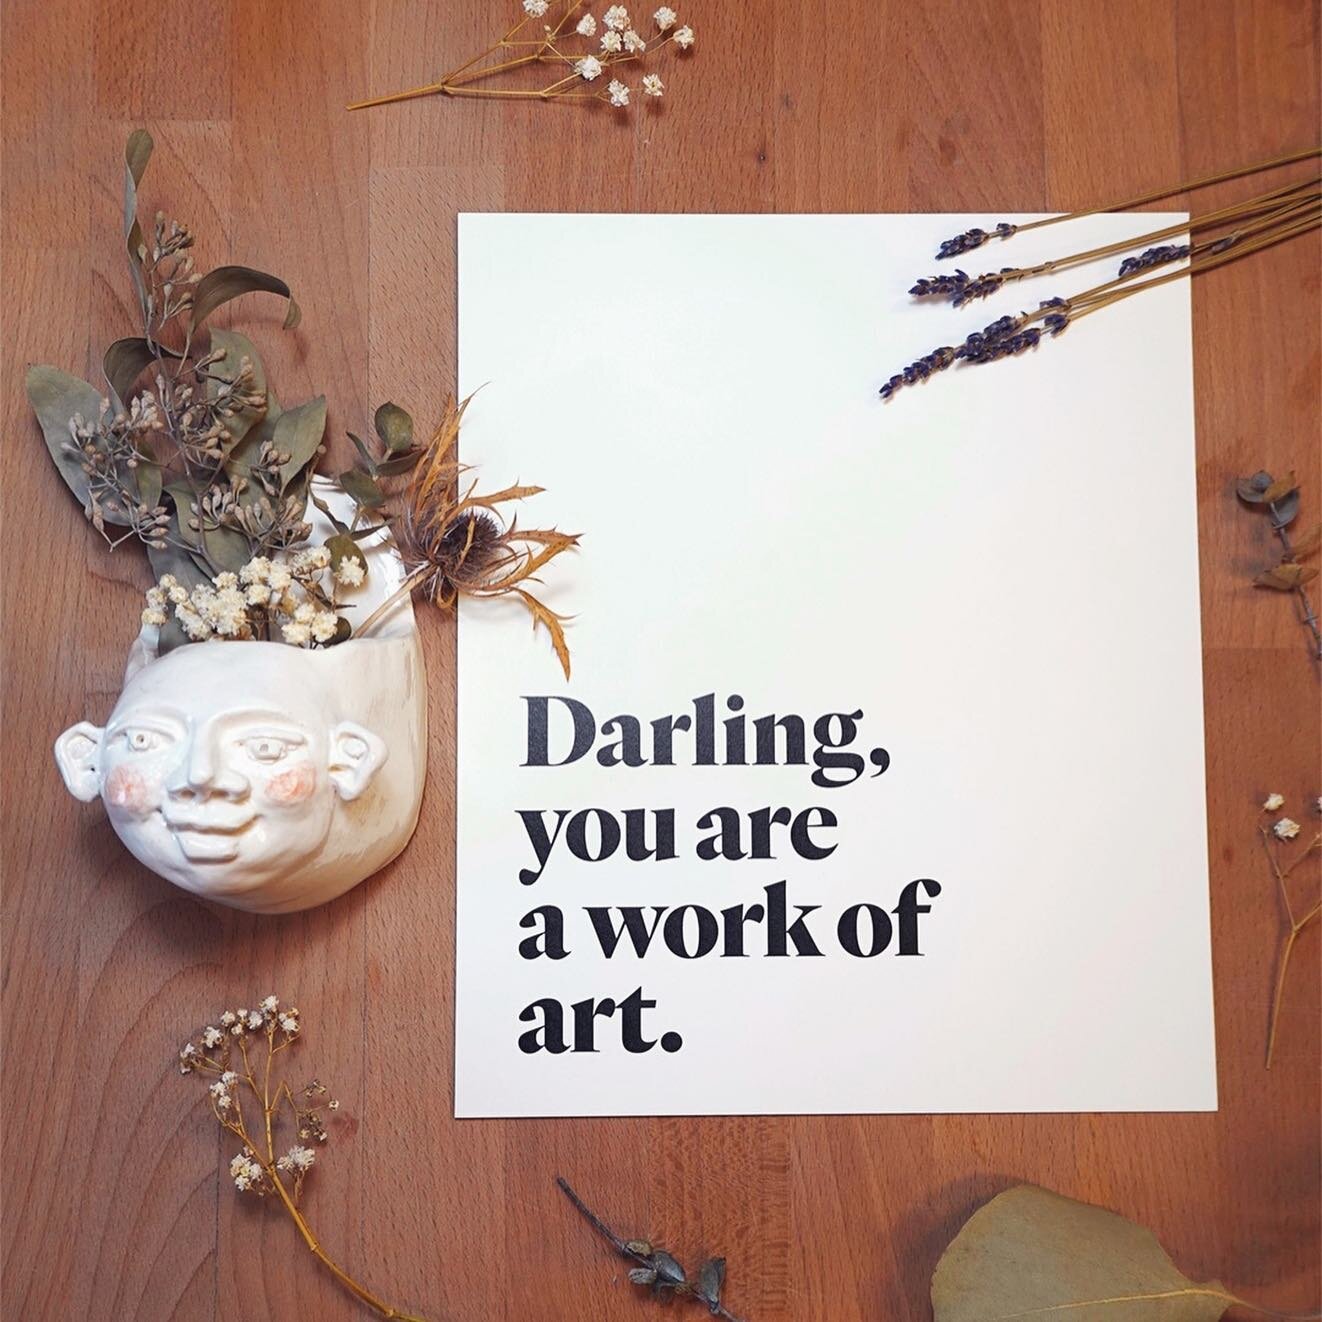 **GIVEAWAY** @darling reached out about teaming up for a giveaway and I was like um YES PLEASE because I &lt;3 Darling Magazine. So! For a chance to win my one-of-a-kind Blushing Face Wall Planter AND this gorgeous @darling print:
﻿
﻿1. Follow&nbsp;m